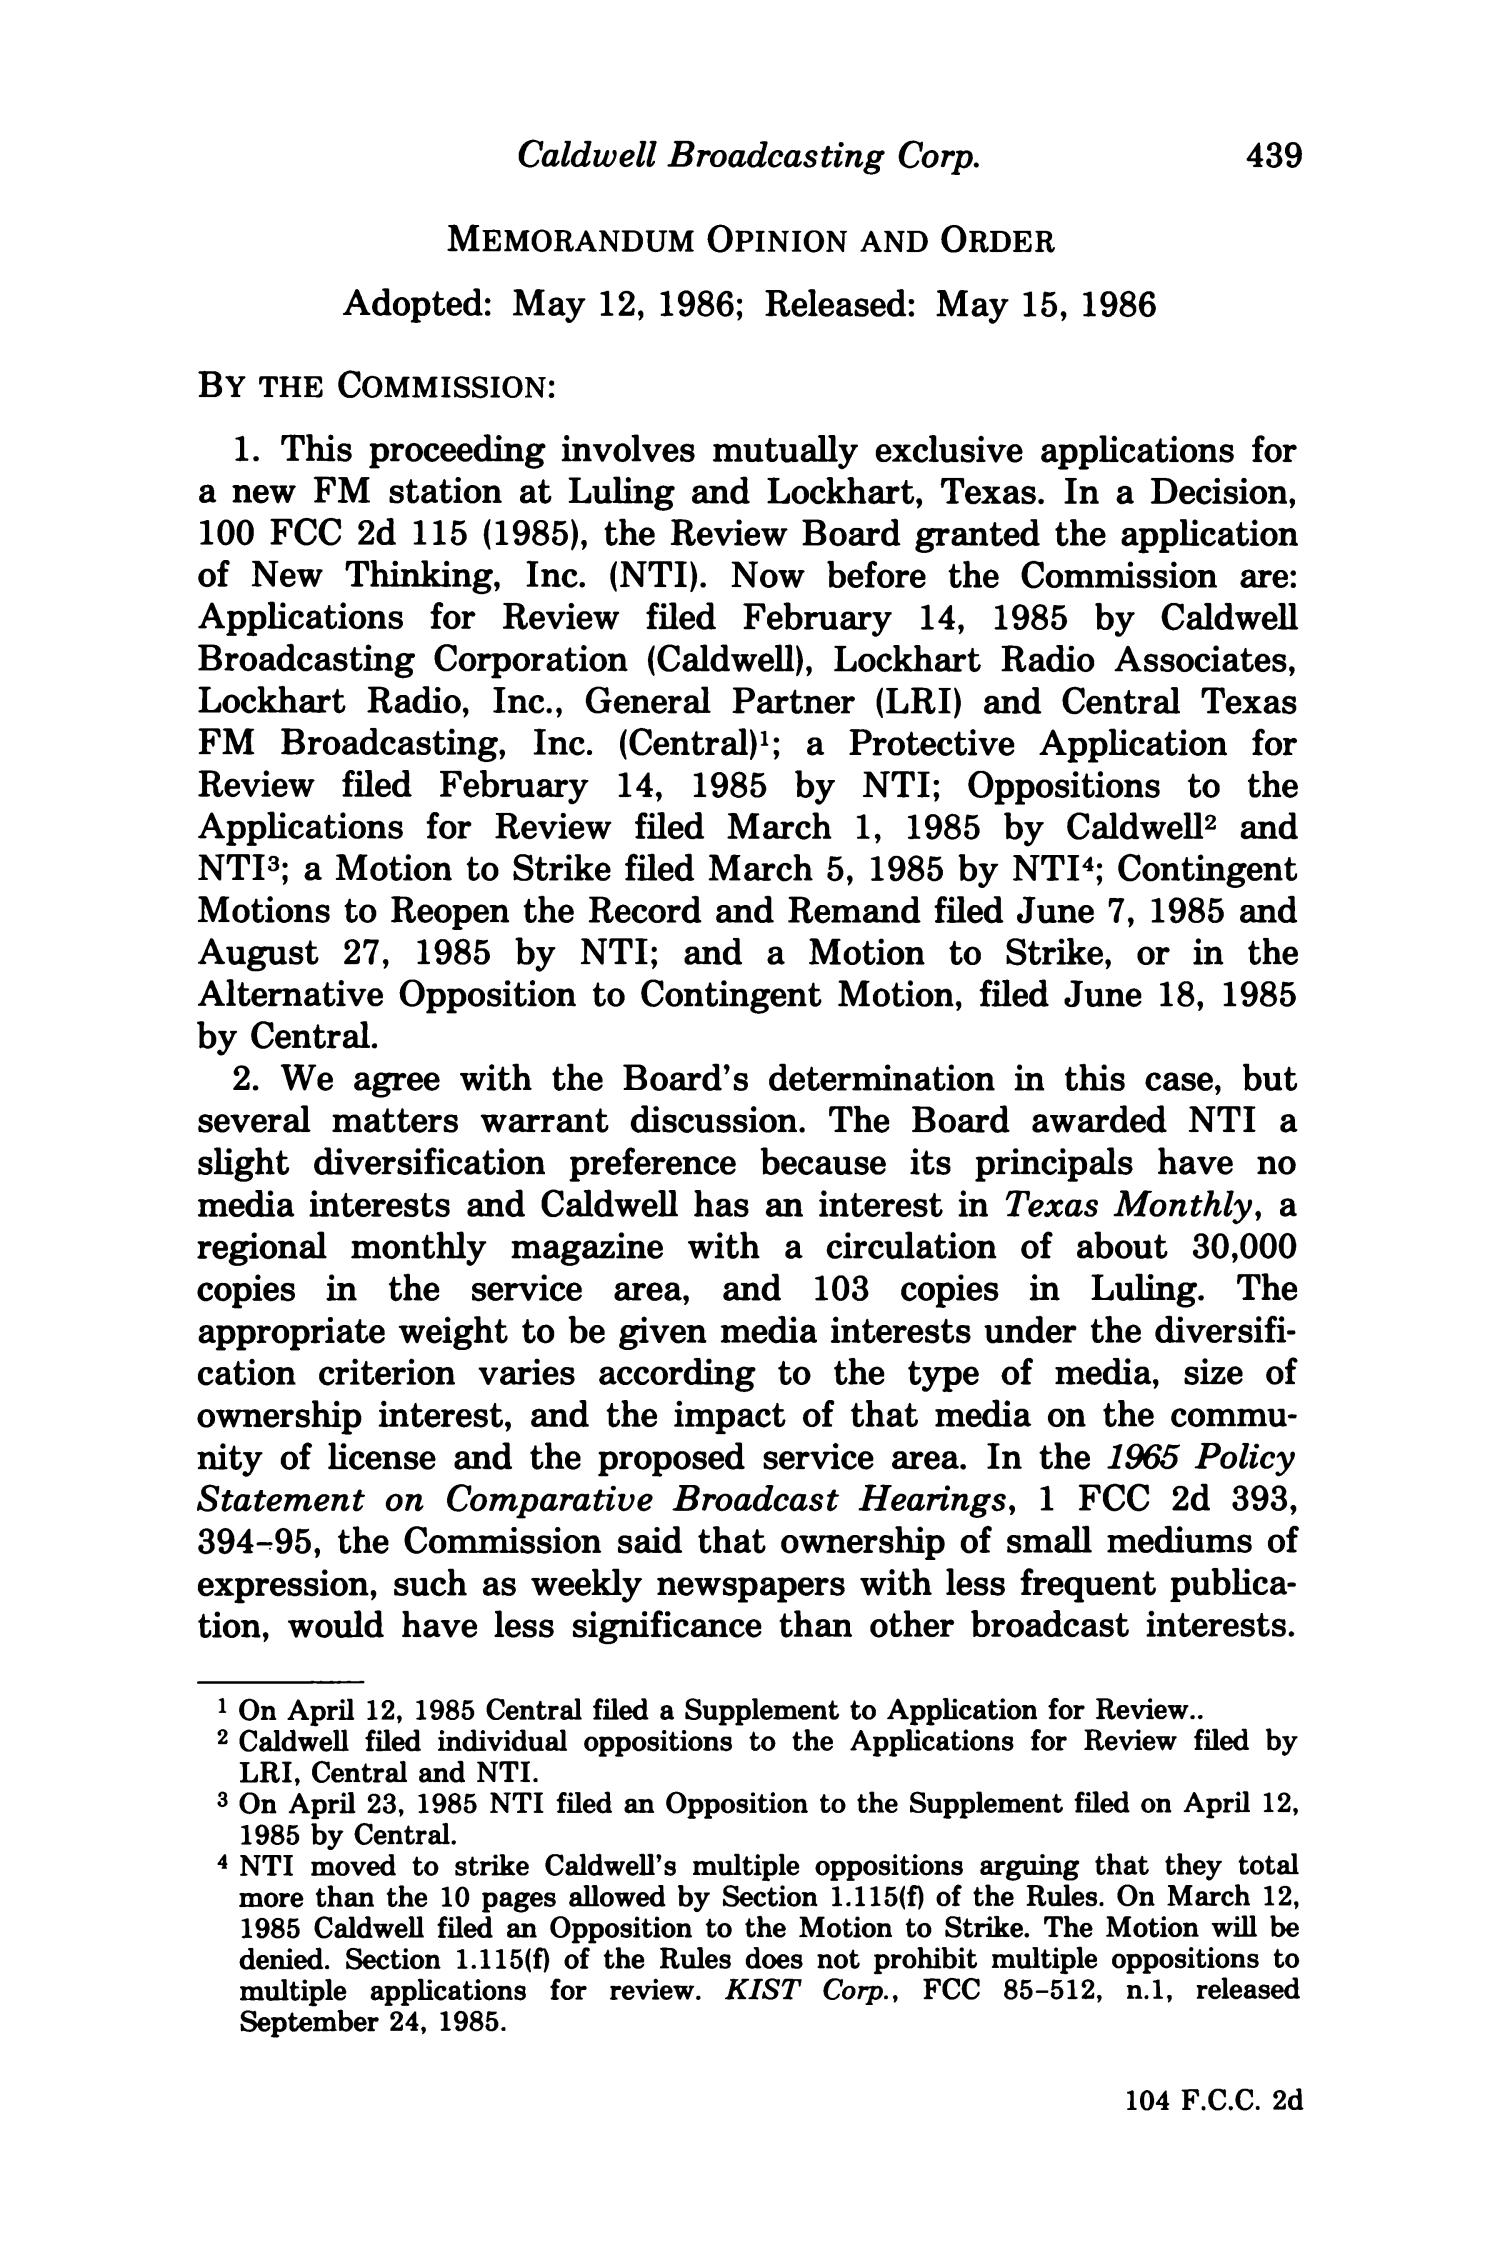 FCC Reports, Second Series, Volume 104, Number 2, Pages 375 to 719, August 1986
                                                
                                                    439
                                                